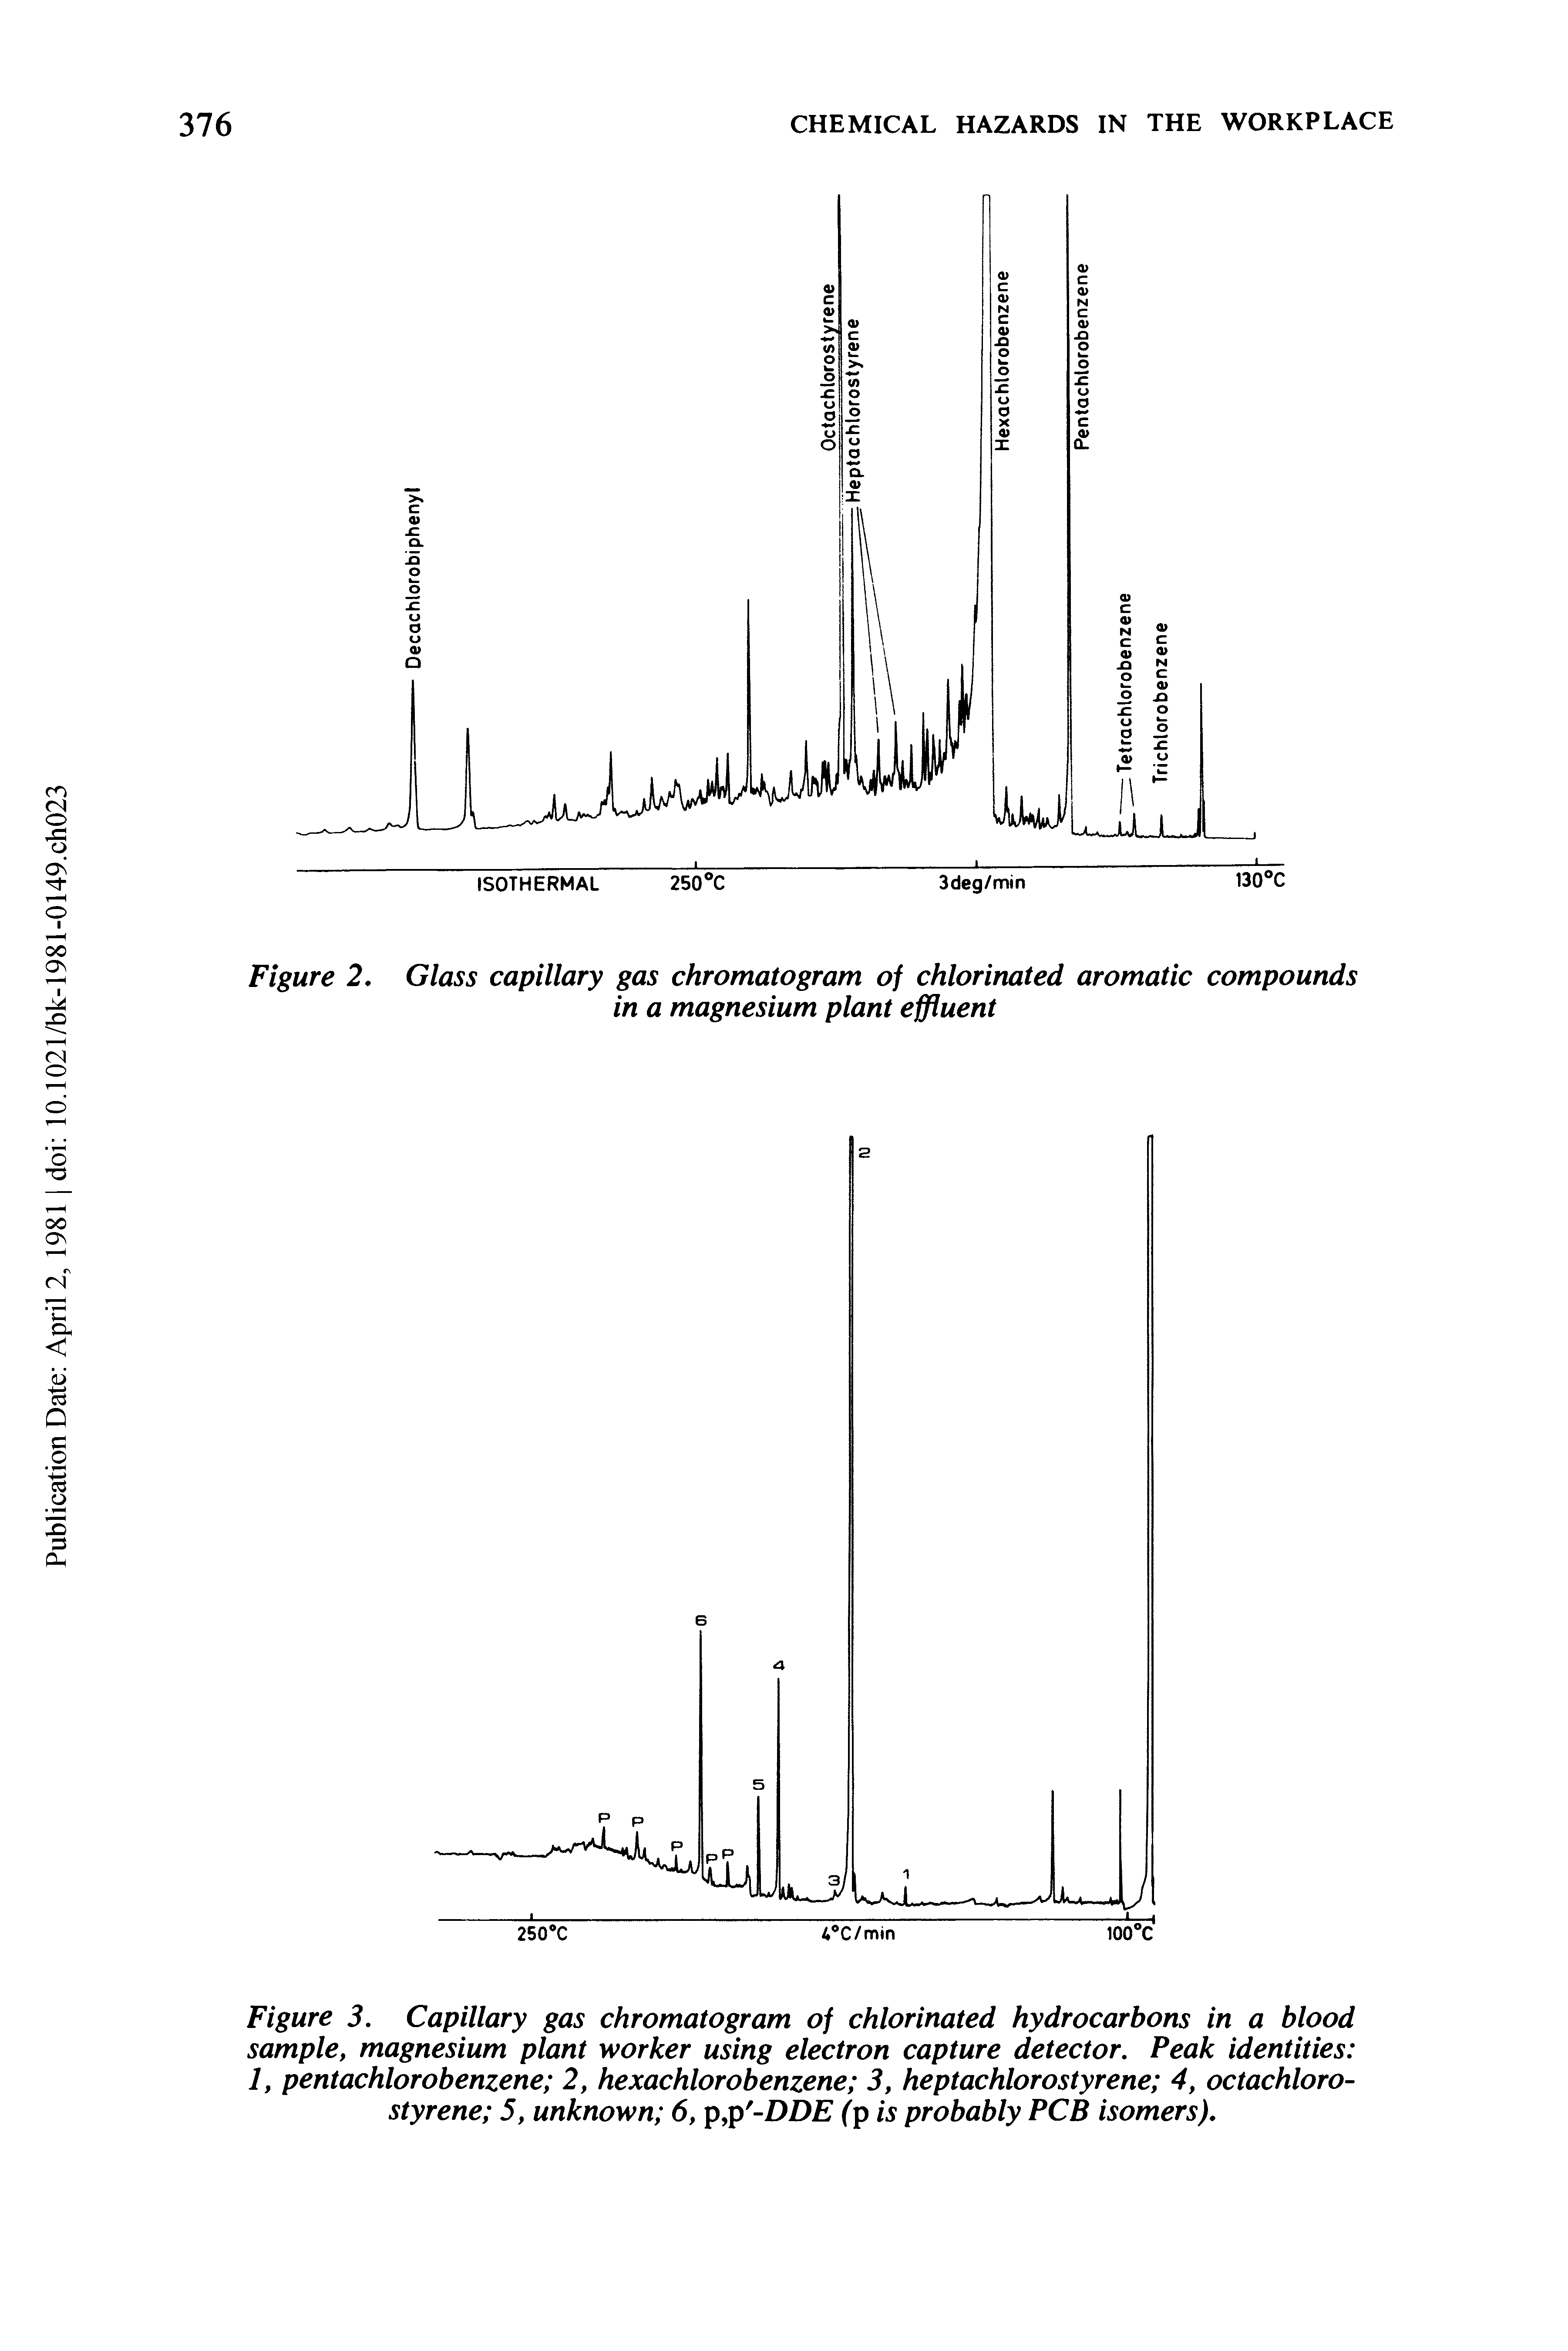 Figure 2. Glass capillary gas chromatogram of chlorinated aromatic compounds in a magnesium plant effluent...